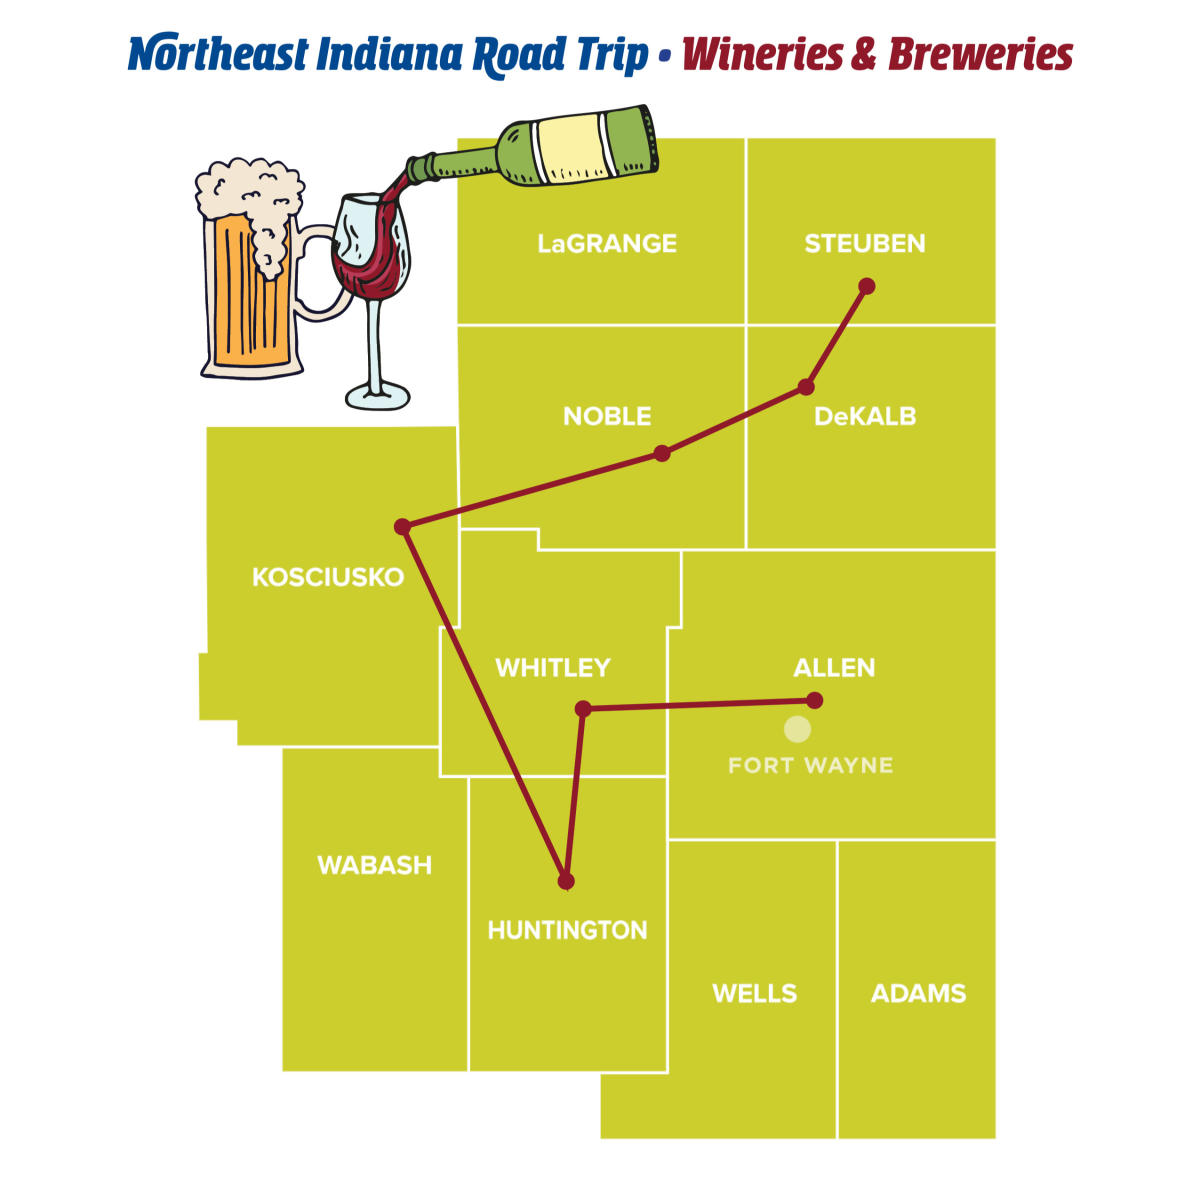 Wineries and Breweries - Northeast Indiana Road Trips